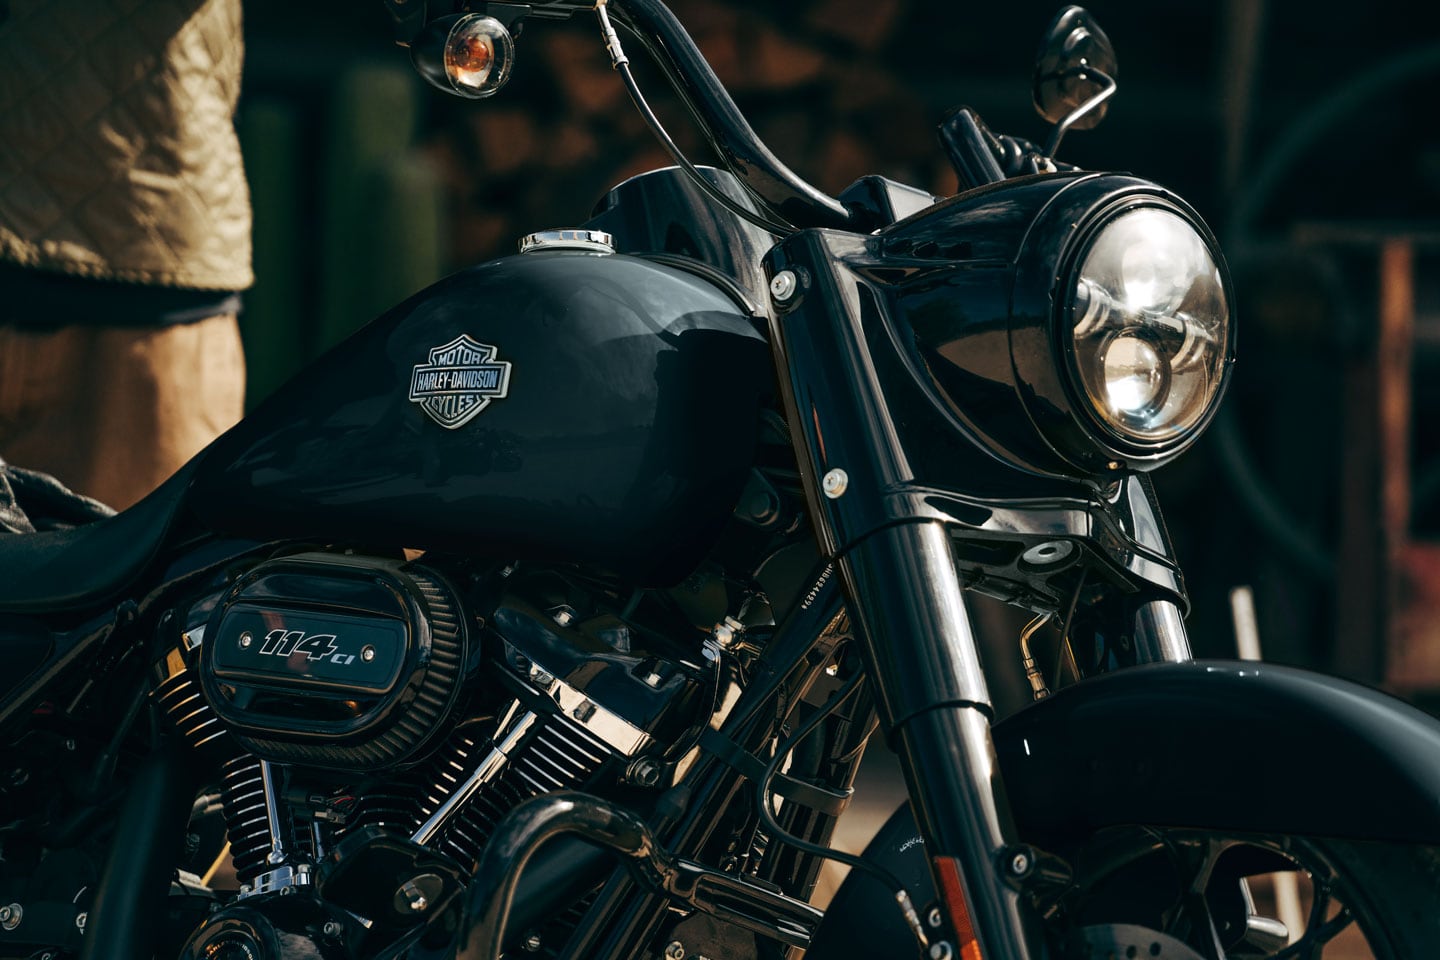 The Road King’s low rear suspension, stretched-out silhouette, and mini-ape handlebars give it what H-D calls a hot-rod aesthetic.